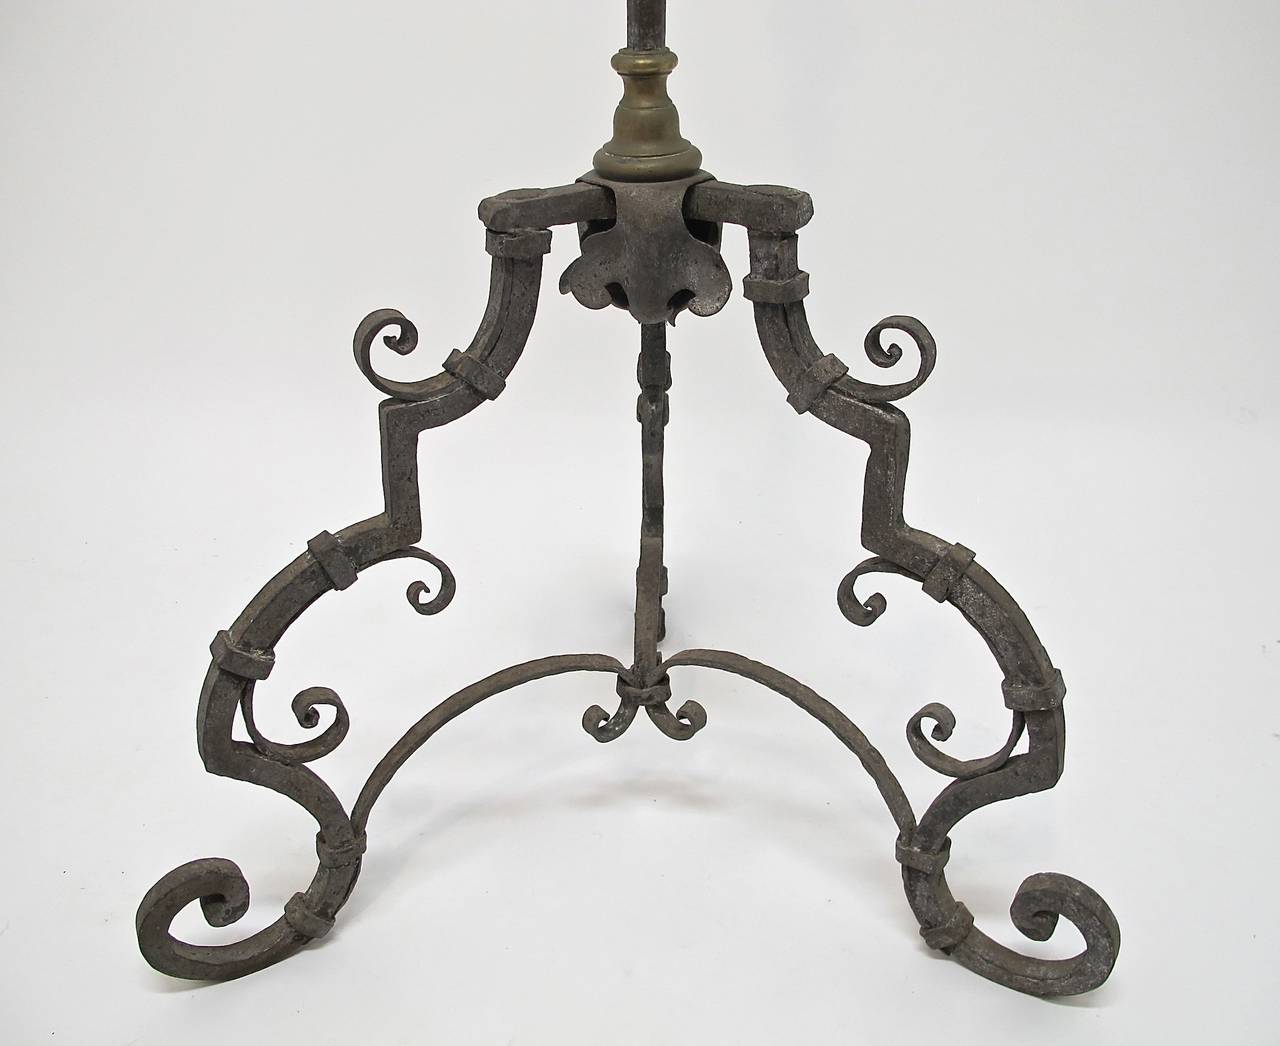 An impressive large and heavy three legged wrought iron candle stand with bronze hardware detail. Italy, 18th century.